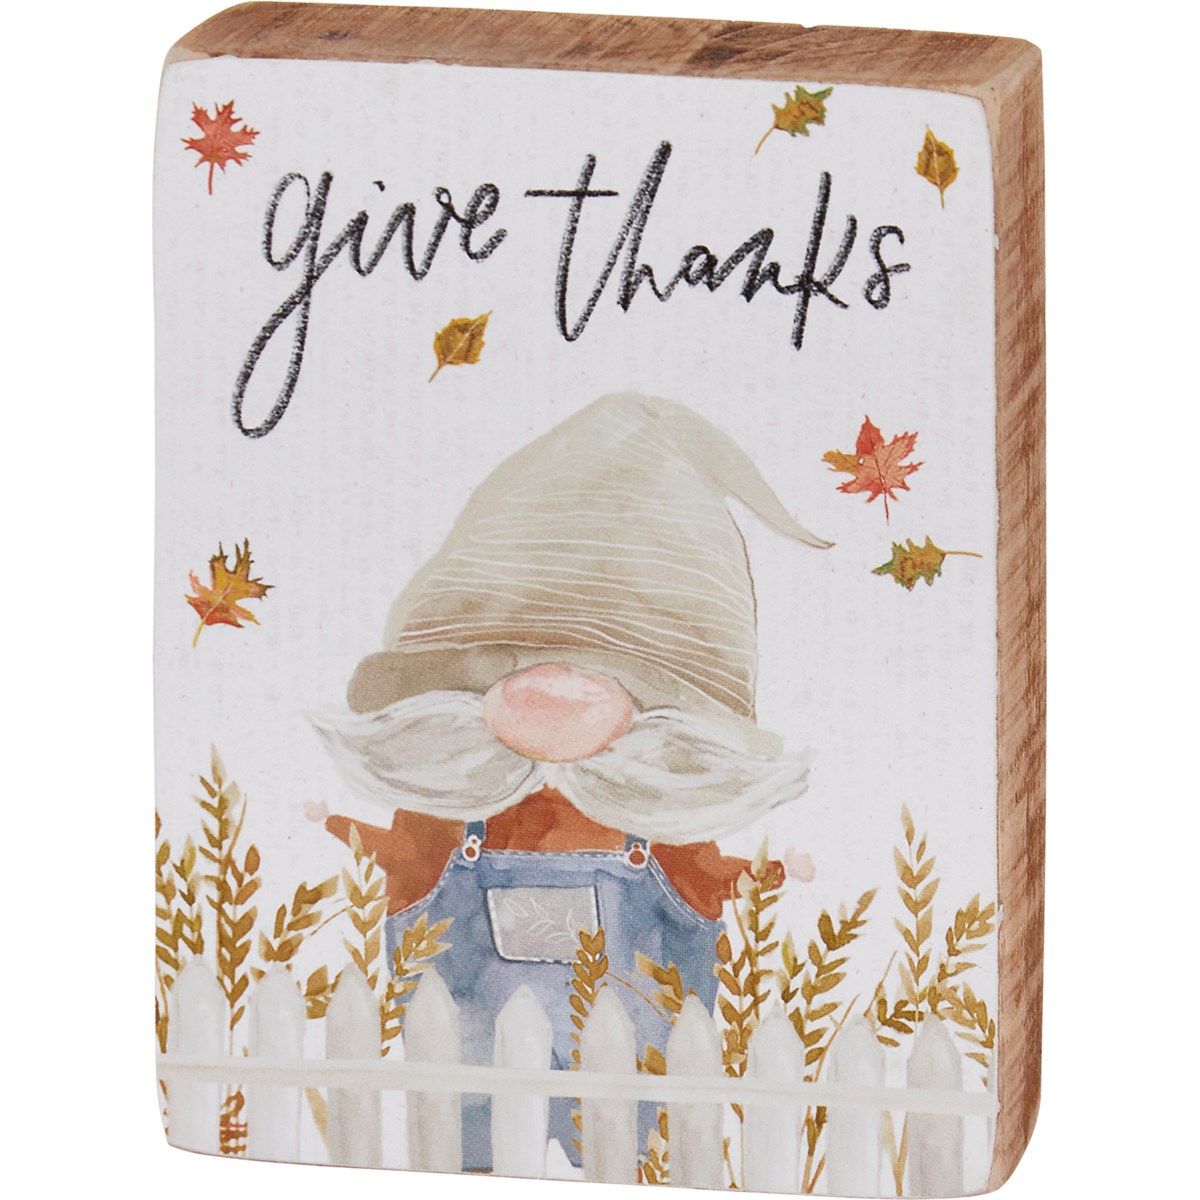 Give Thanks Gnome Block Sign - Wood, Paper